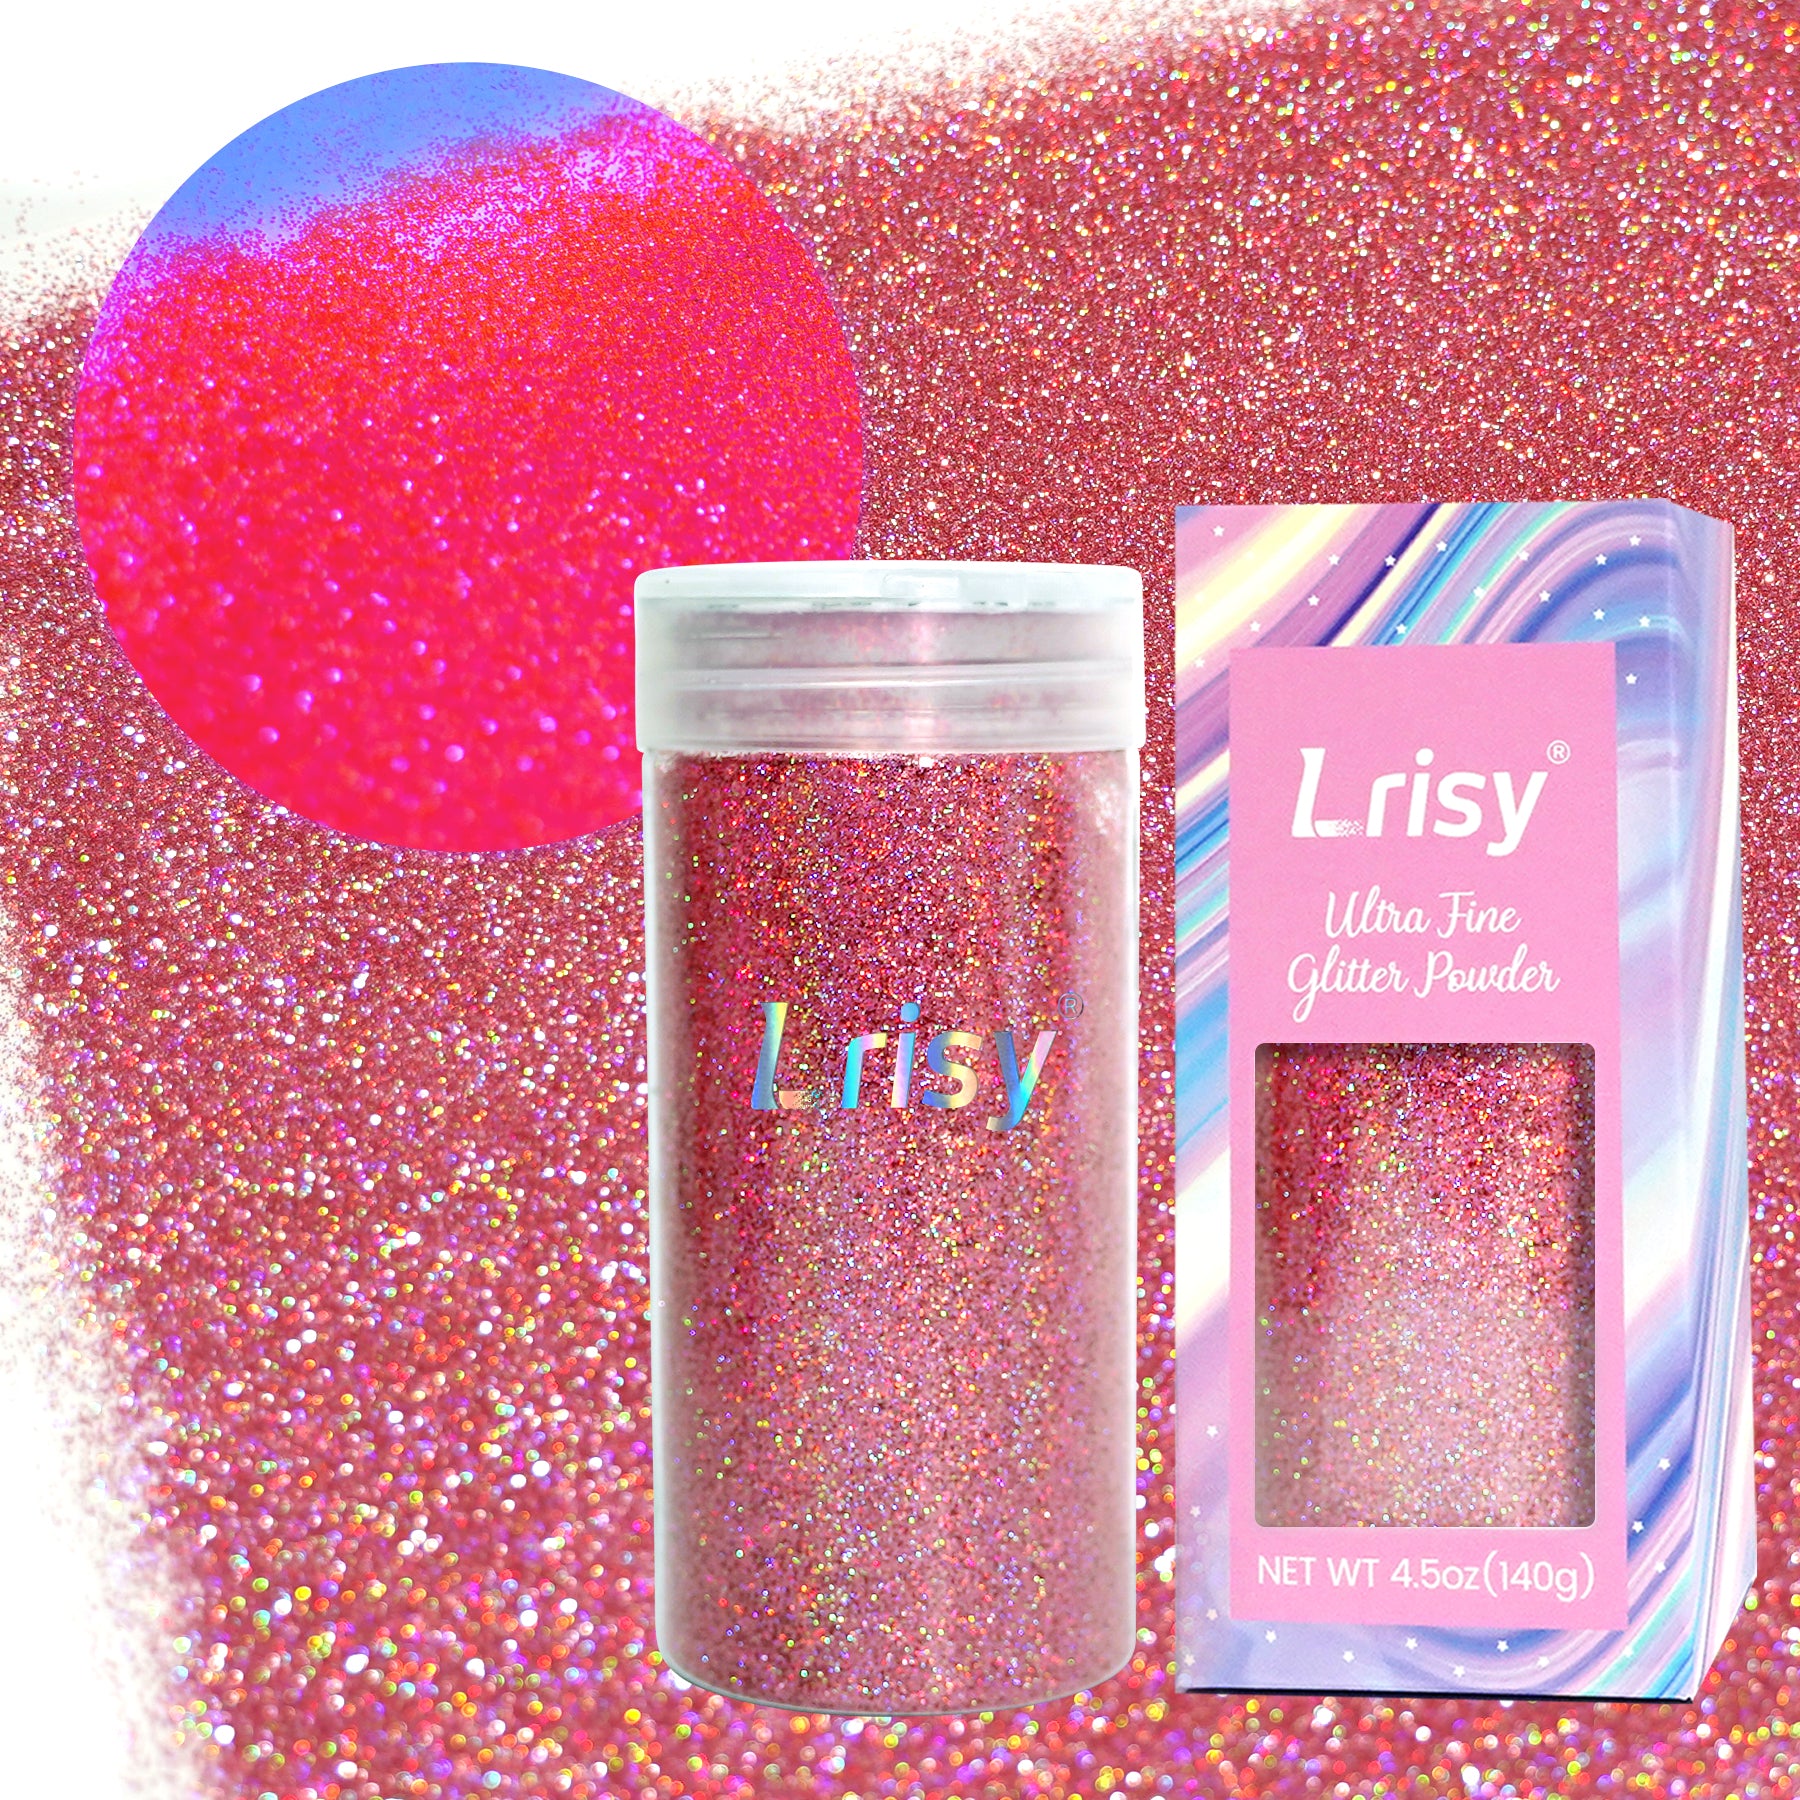 Lrisy Holographic Extra Fine Neon Punk Glitter Powder with Shaker Lid 140g/4.5oz (Holographic Hazy Pink)